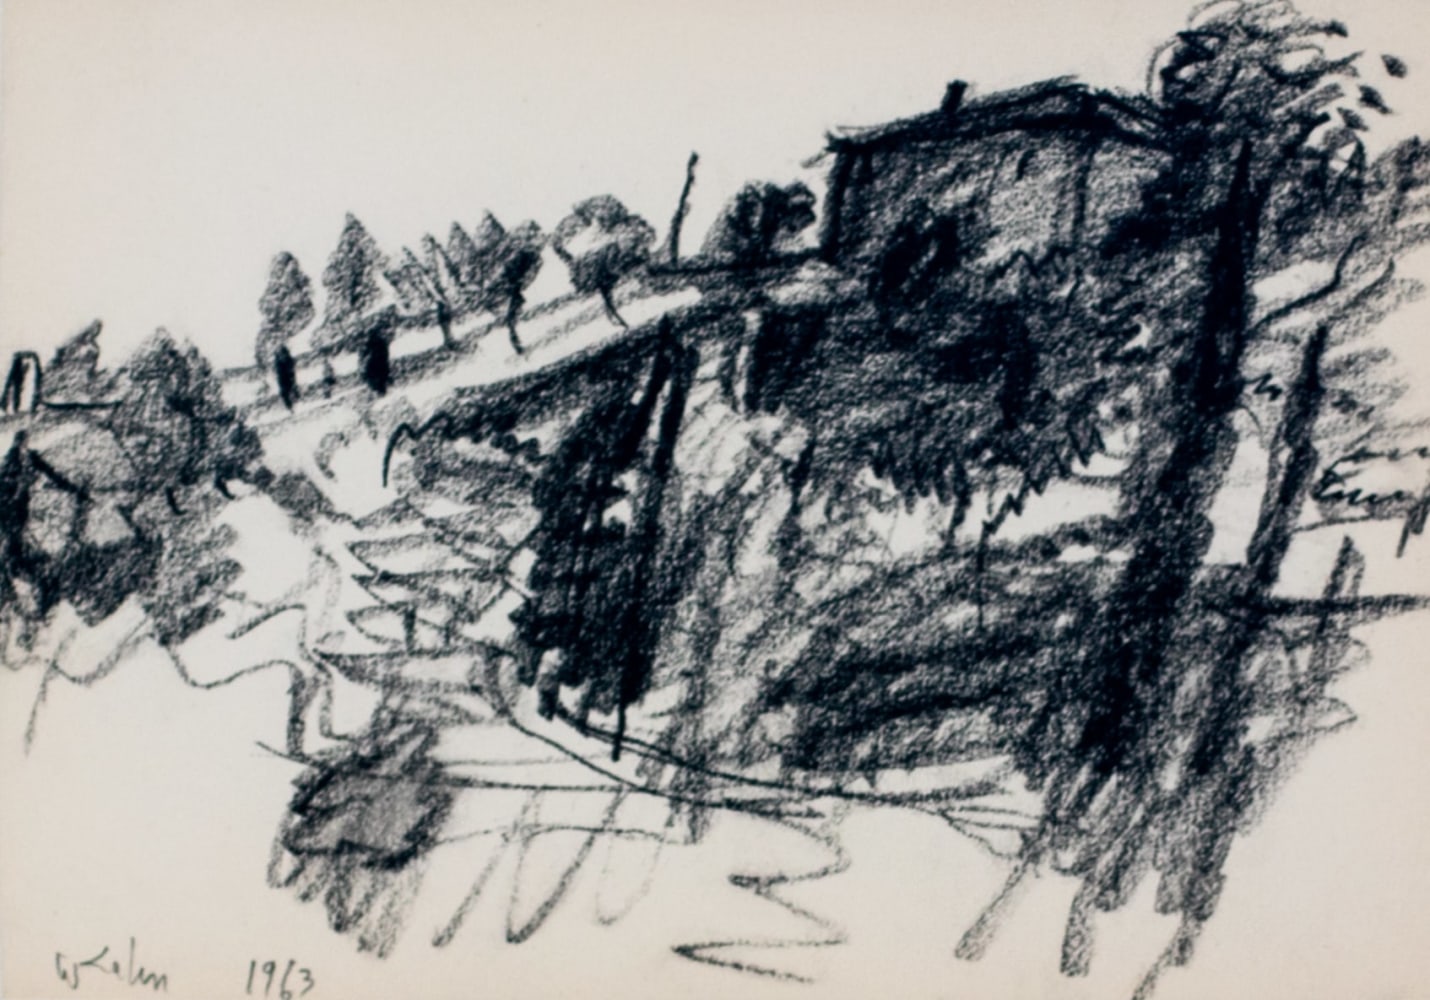 Wolf Kahn, In Tuscany 2, 1957, conte crayon on paper, 4.75 x 6.75 inches, Wolf Kahn art for sale, Wolf Kahn Drawings